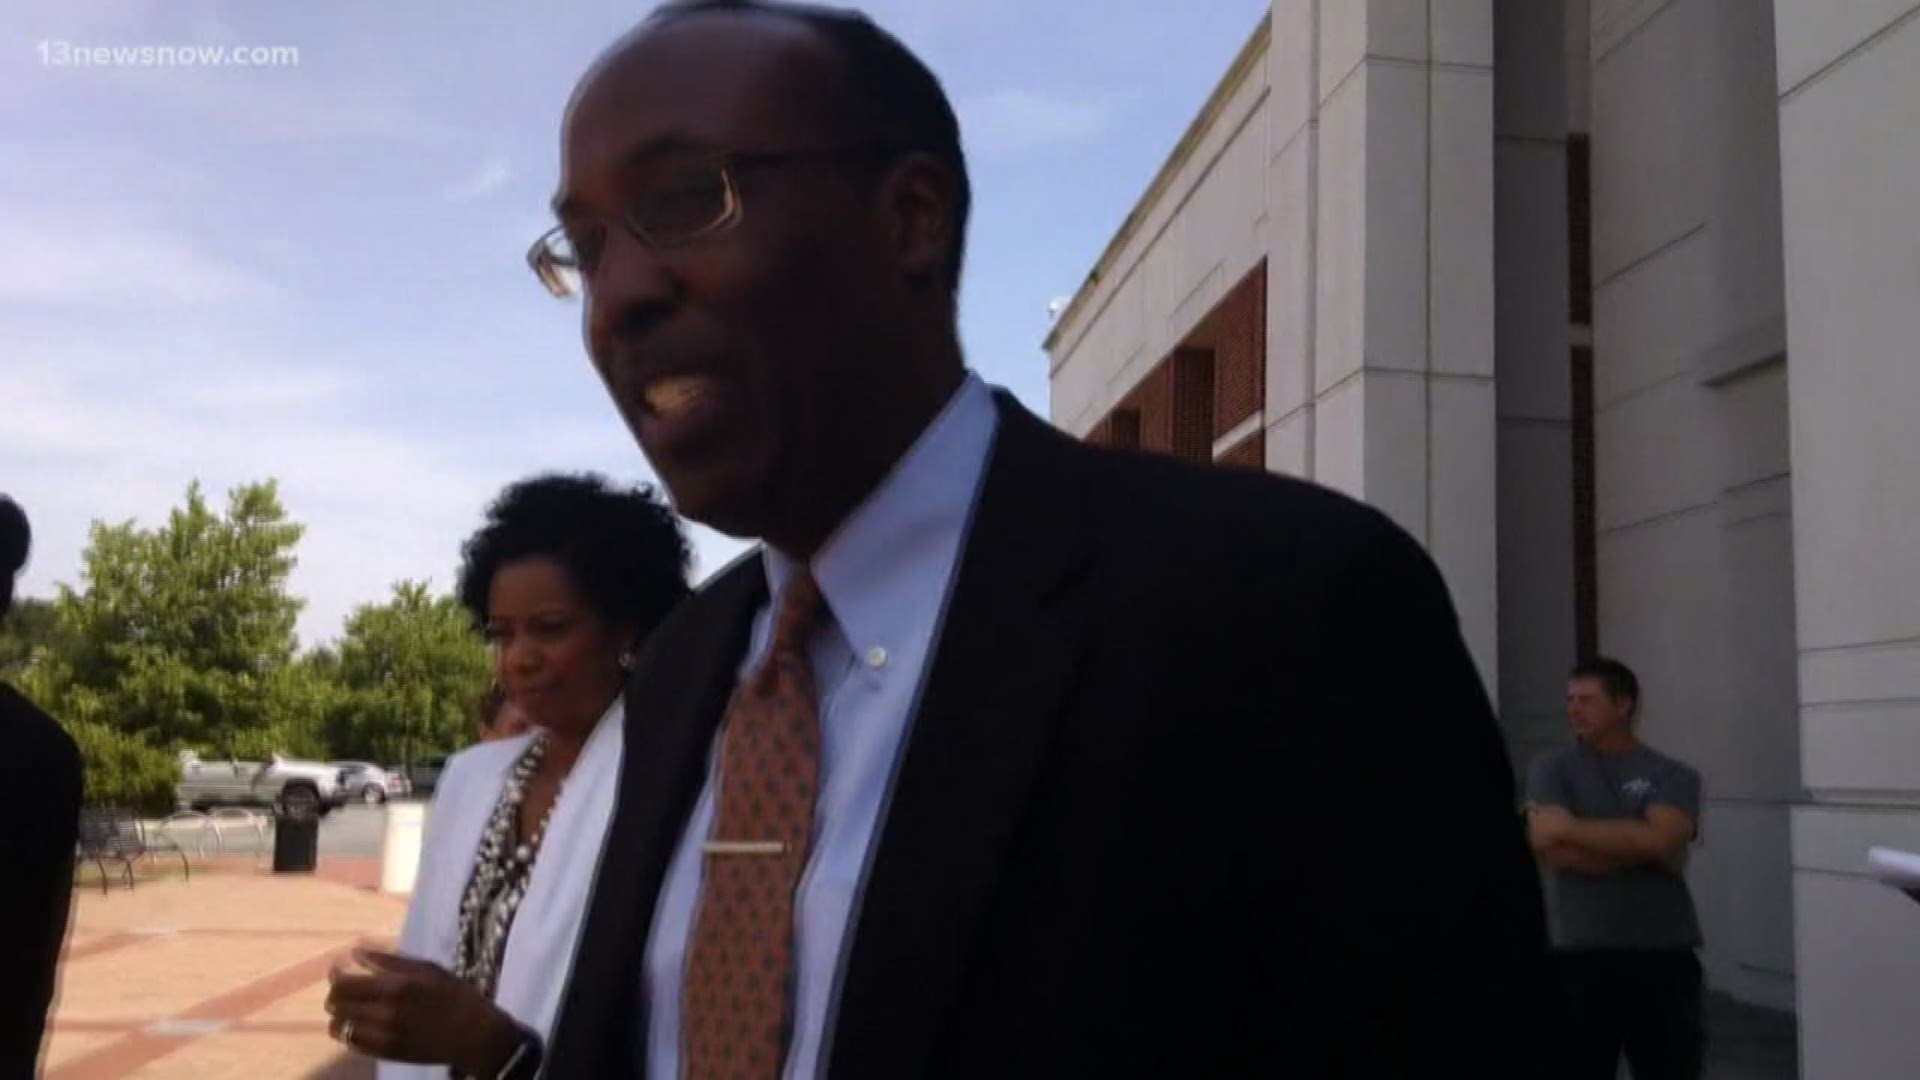 Governor Ralph Northam restored the civil rights for convicted ex-Portsmouth City Councilmember Mark Whitaker.